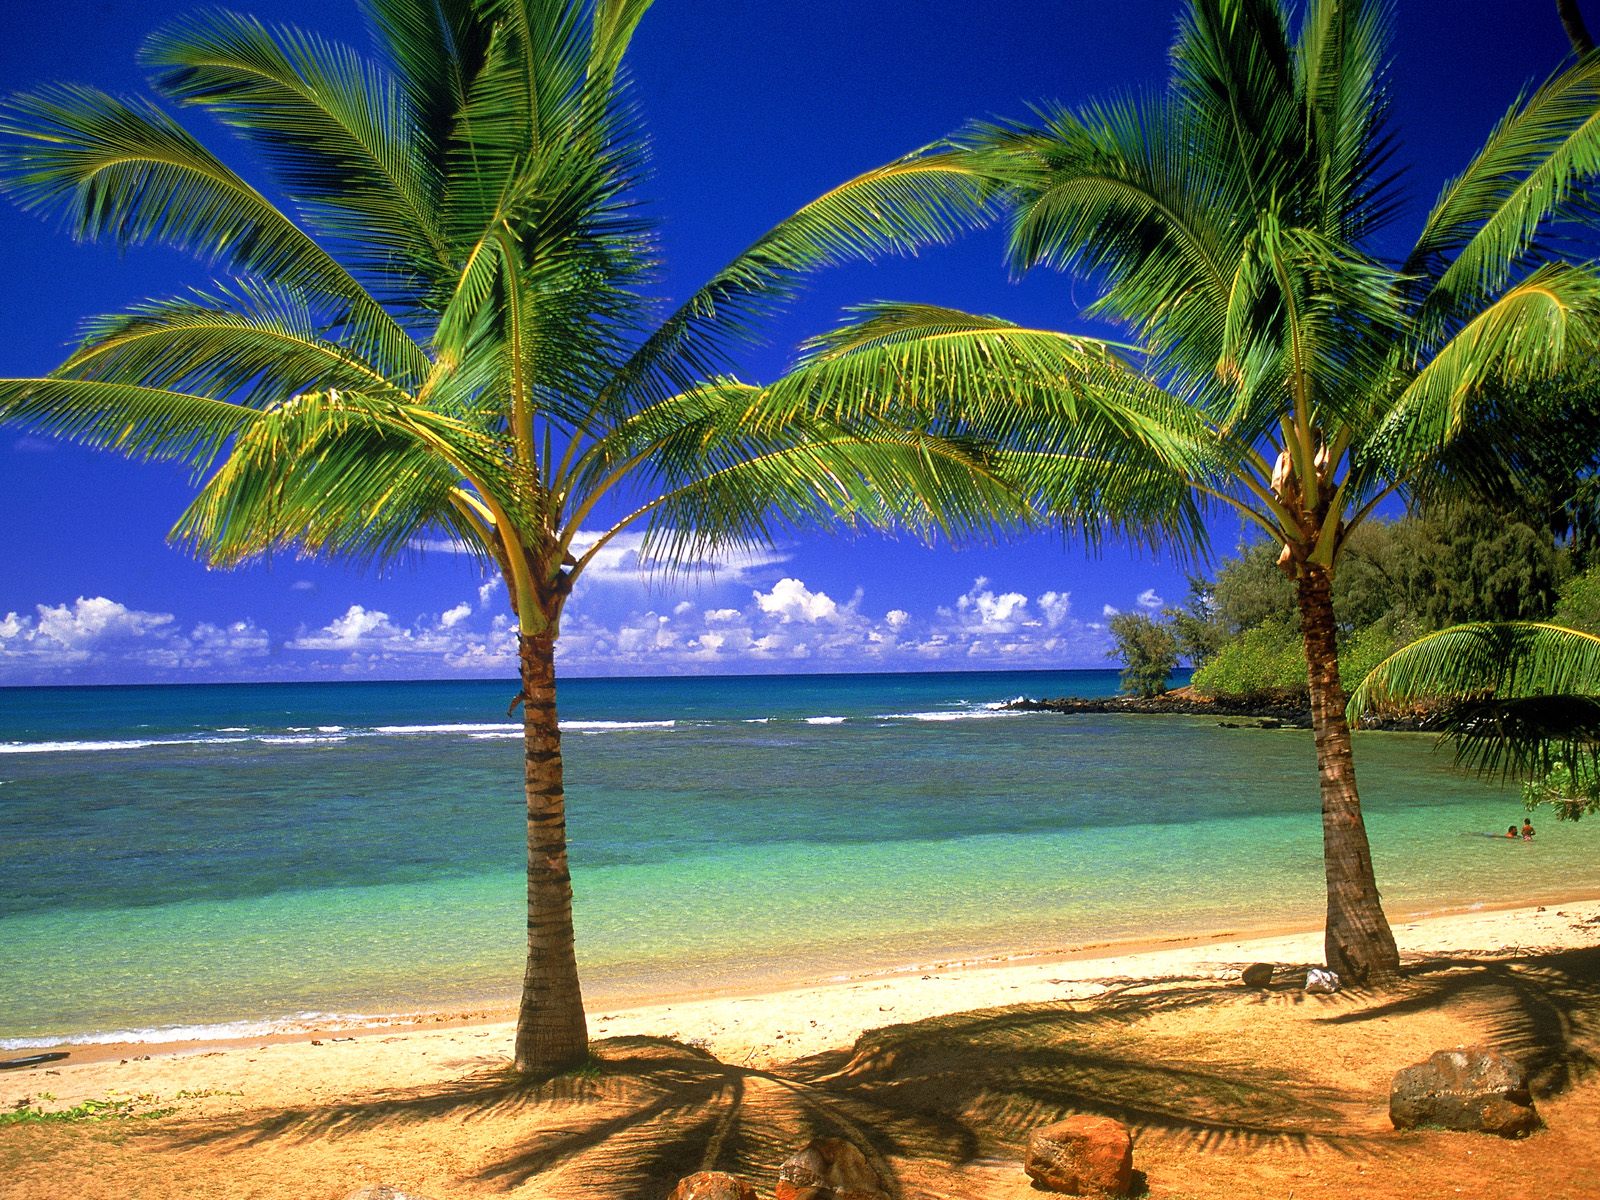 Is Under The Beach Wallpaper Category Of HD Tropical